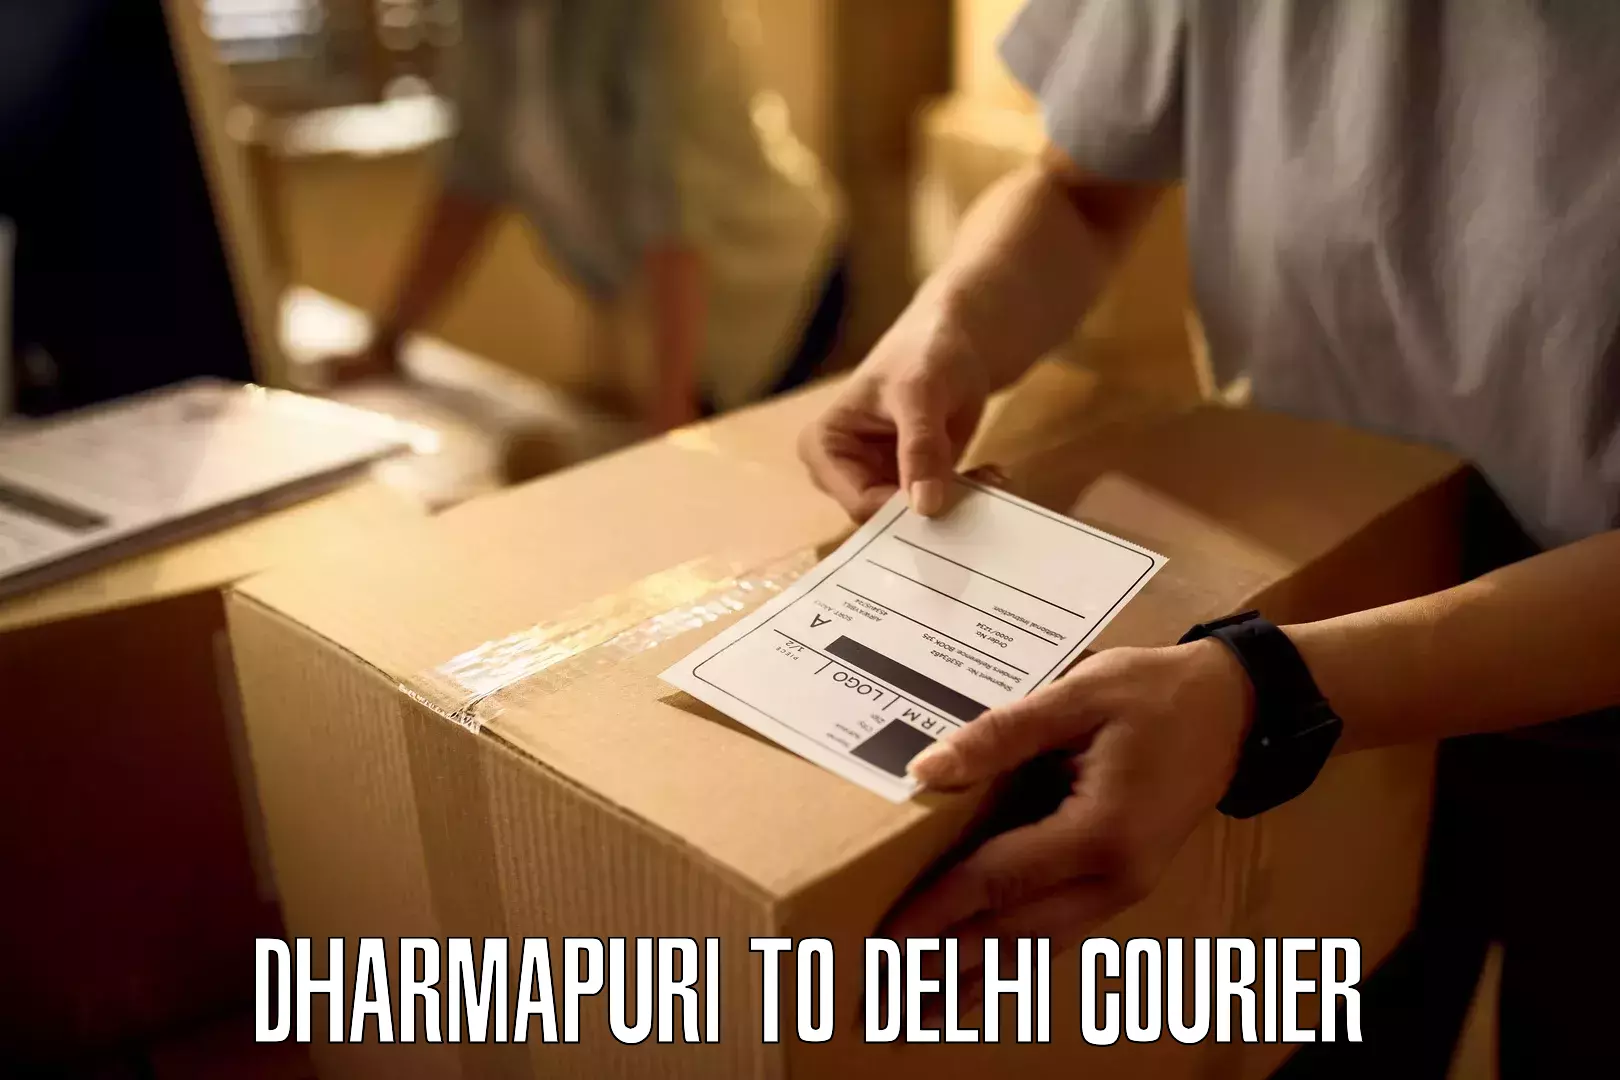 Express delivery network Dharmapuri to East Delhi